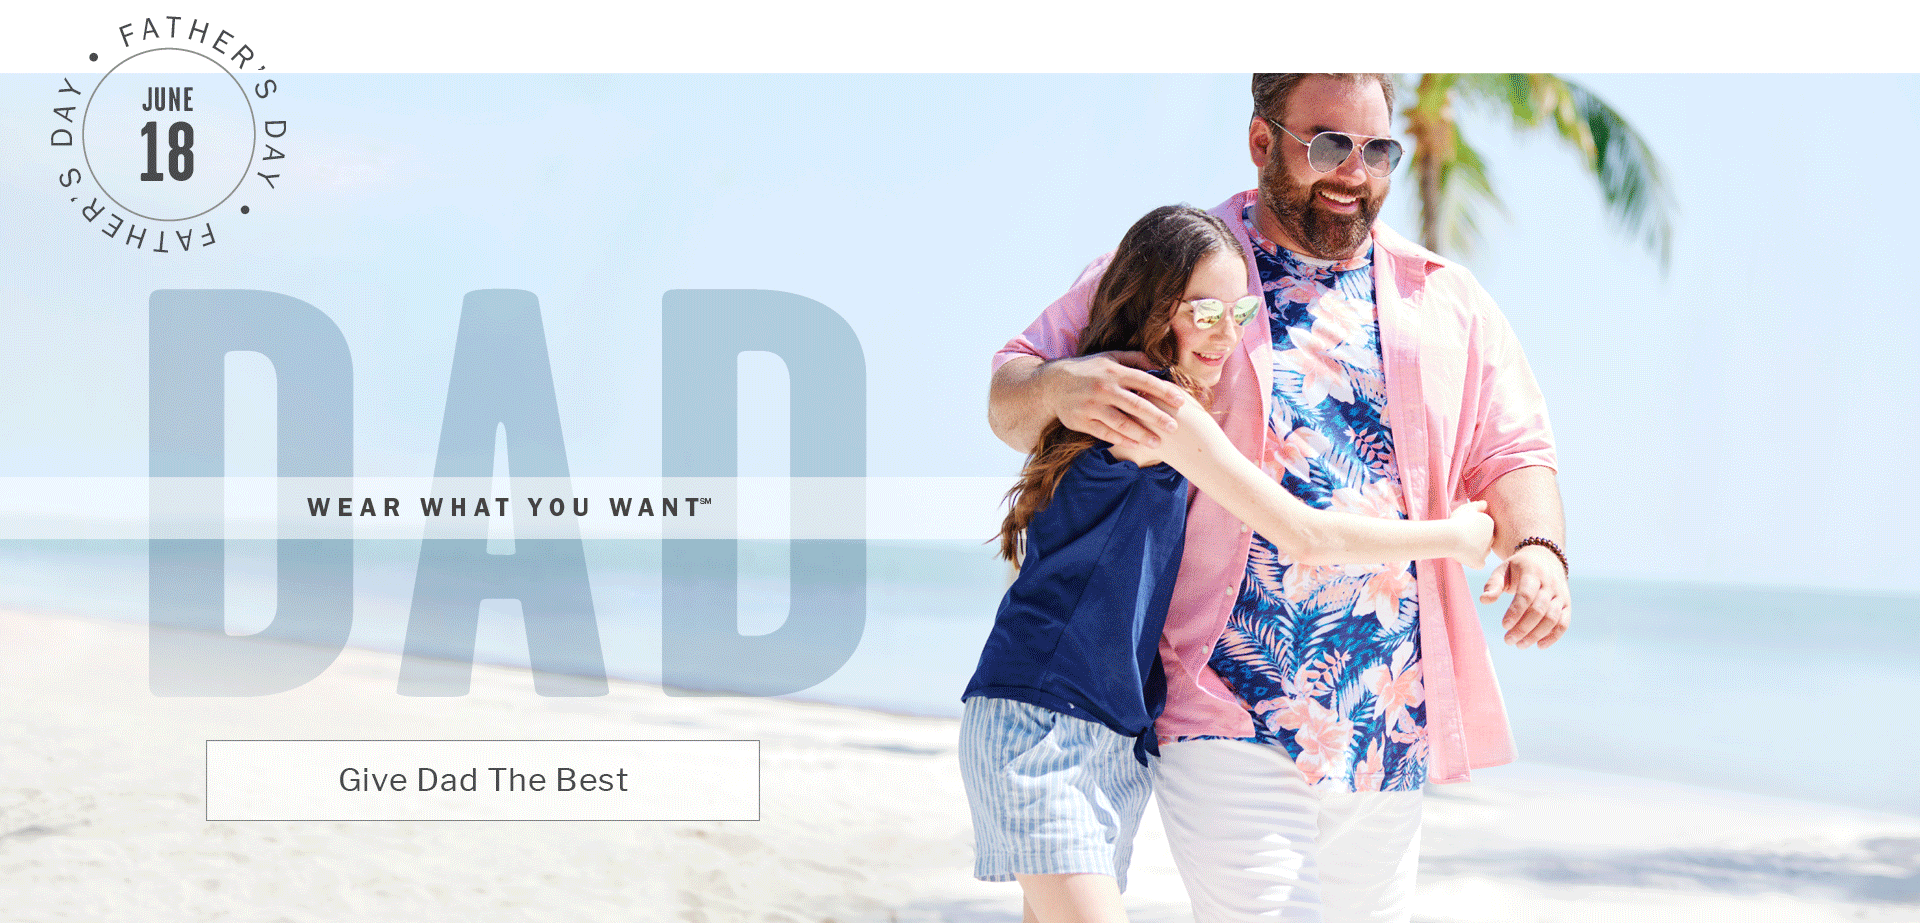 WWYW | WEAR WHAT YOU WANT | FATHER'S DAY IS JUNE 18, 2023